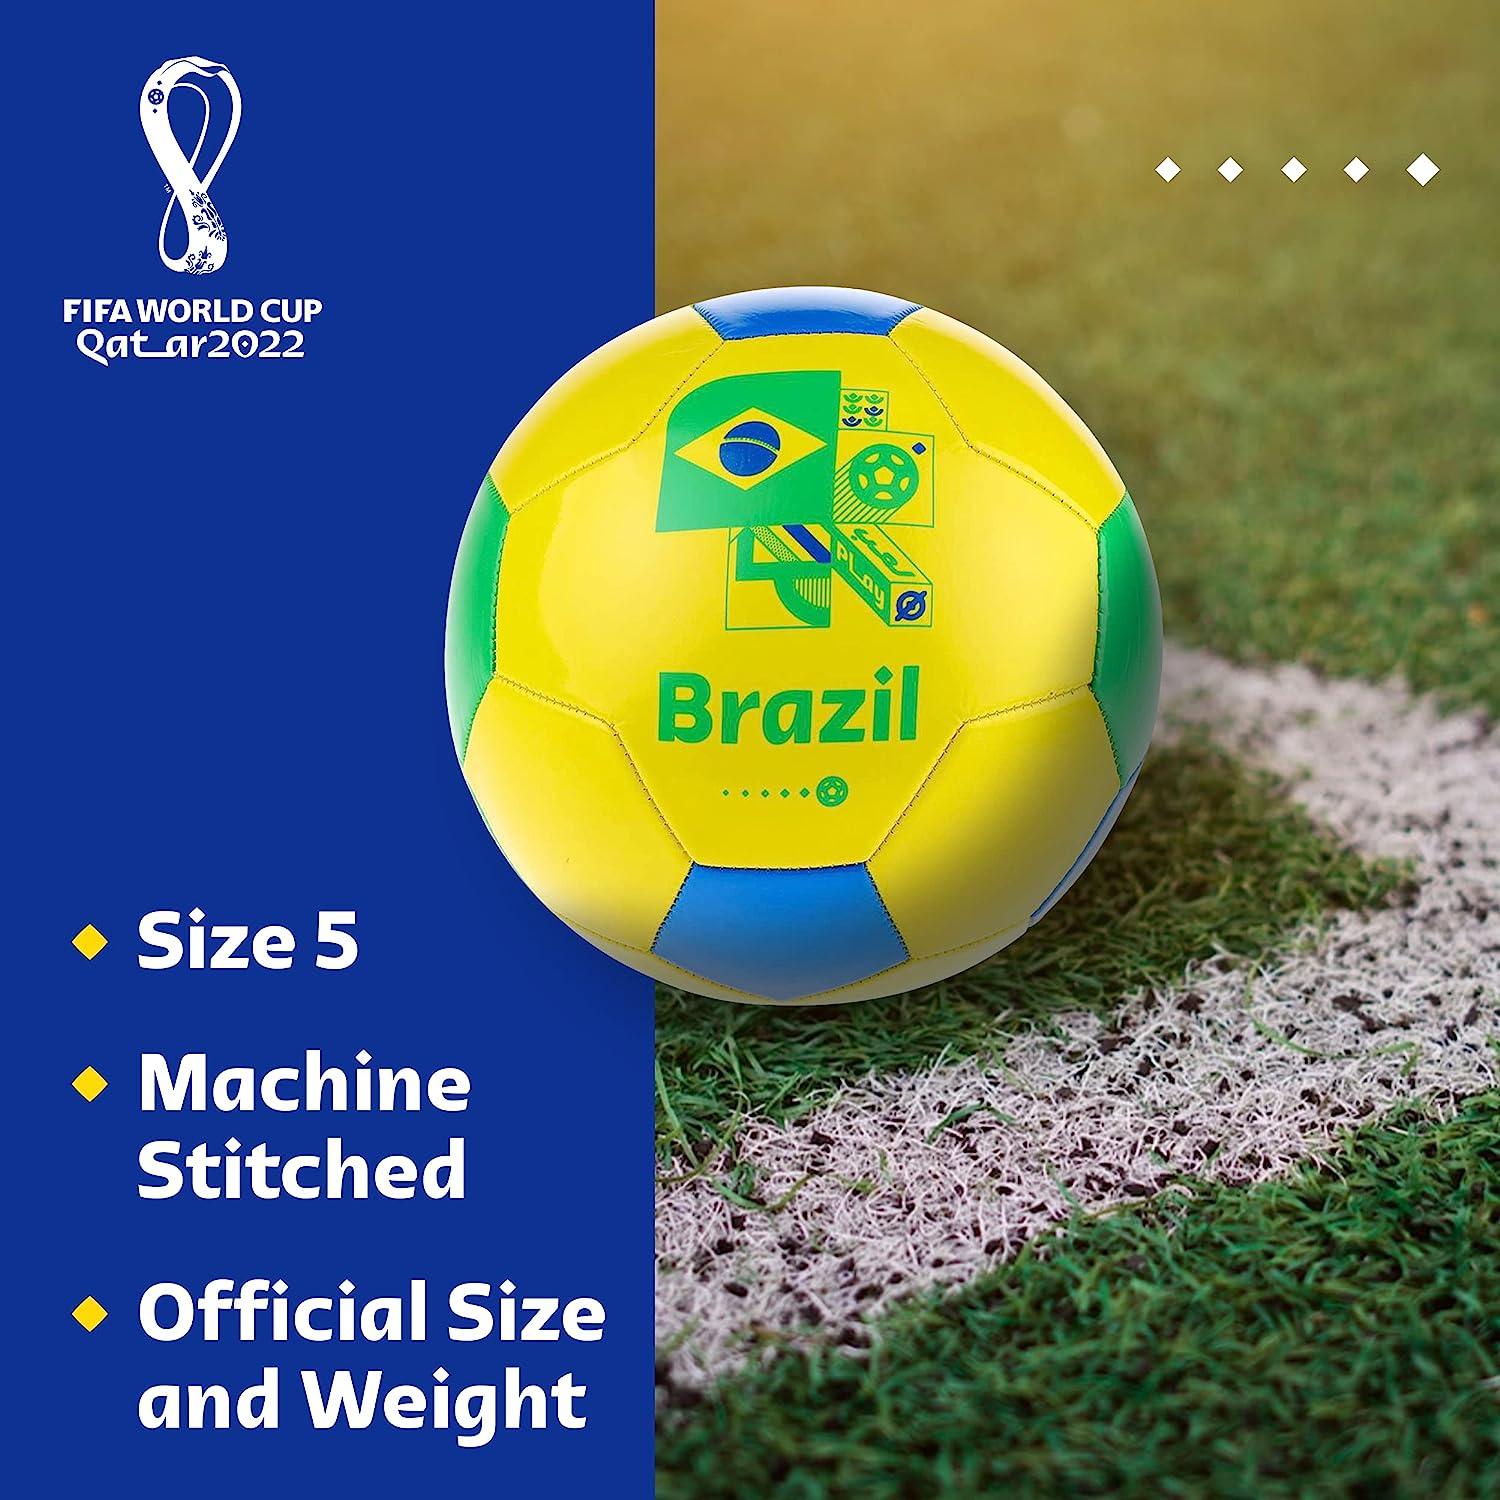  Capelli Sport FIFA World Cup Qatar 2022 Tournament Soccer Ball  Souvenir Display, Officially Licensed Futbol for Youth and Adult Soccer  Players, Berry Combo : Sports & Outdoors